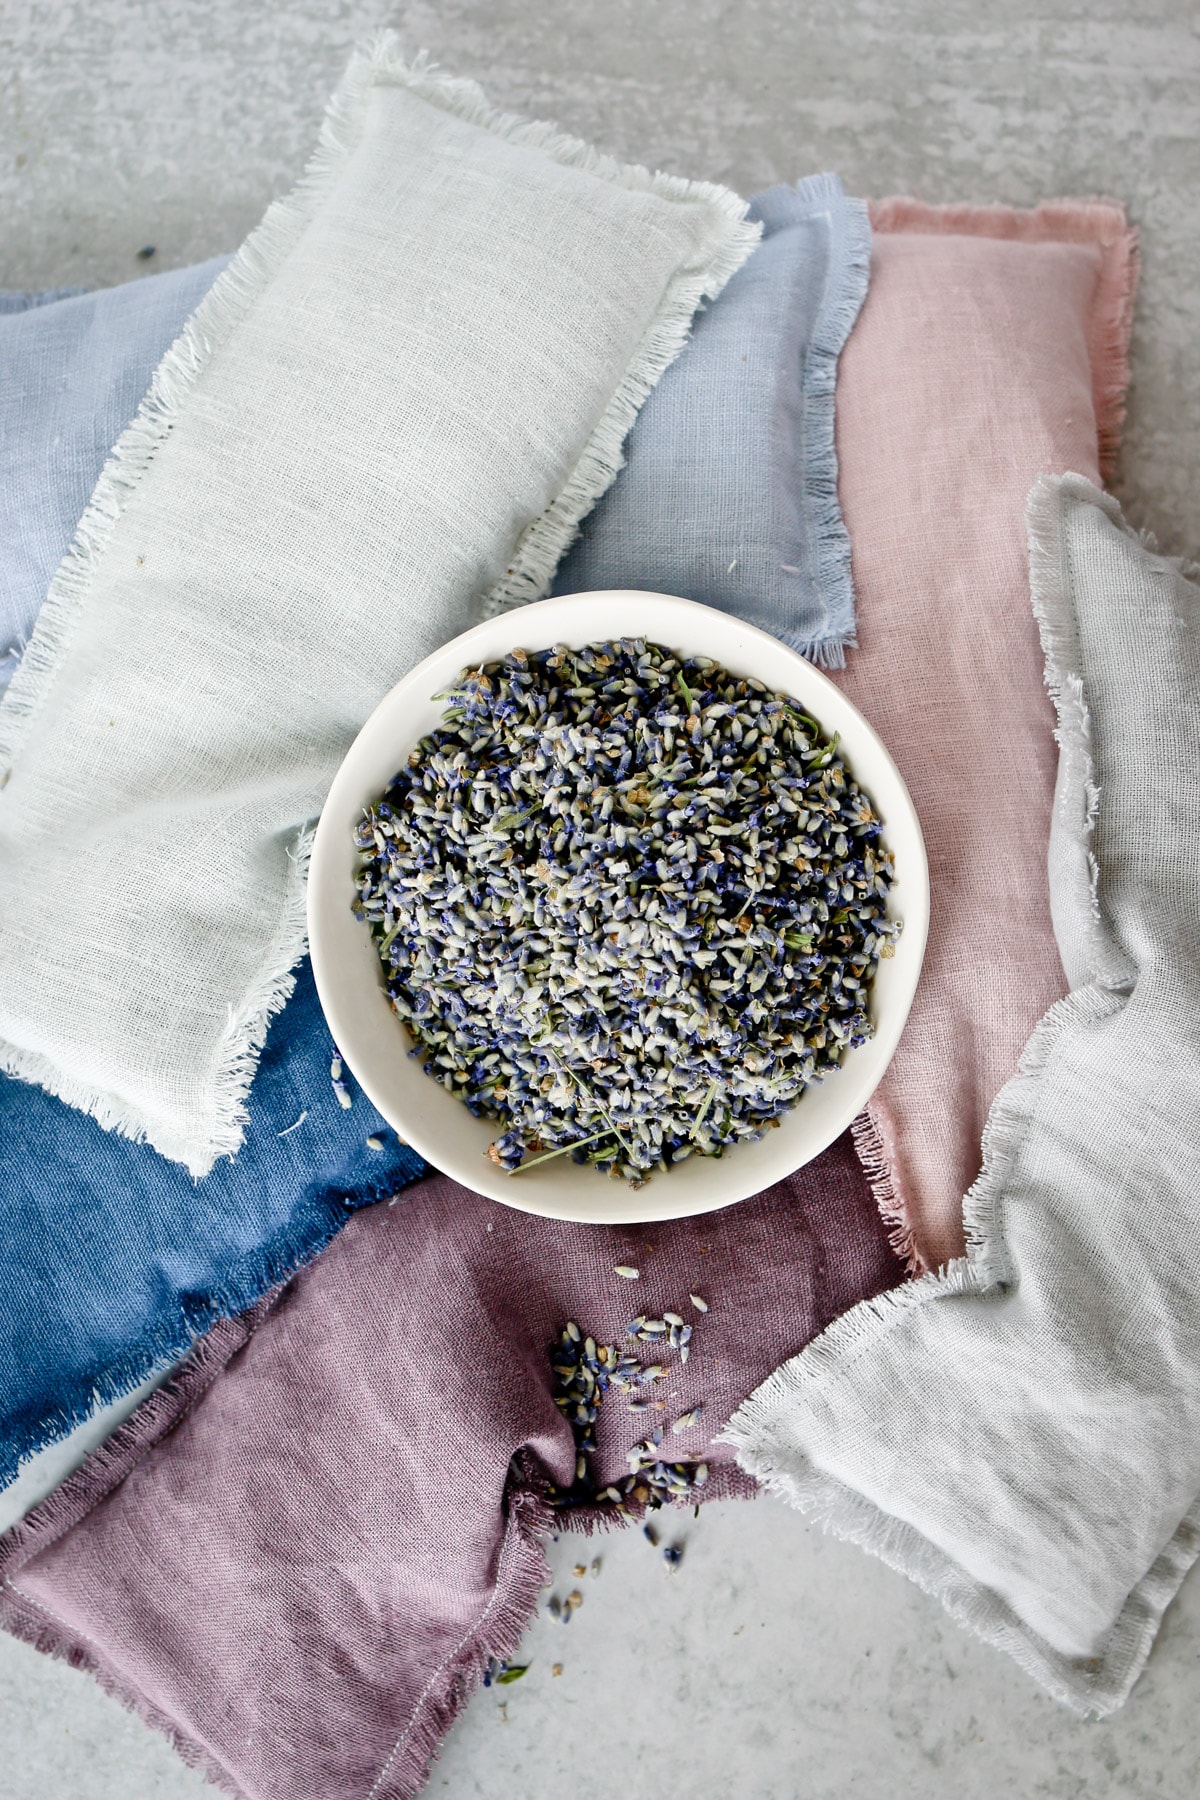 A bowl of lavender buds and eye pillows